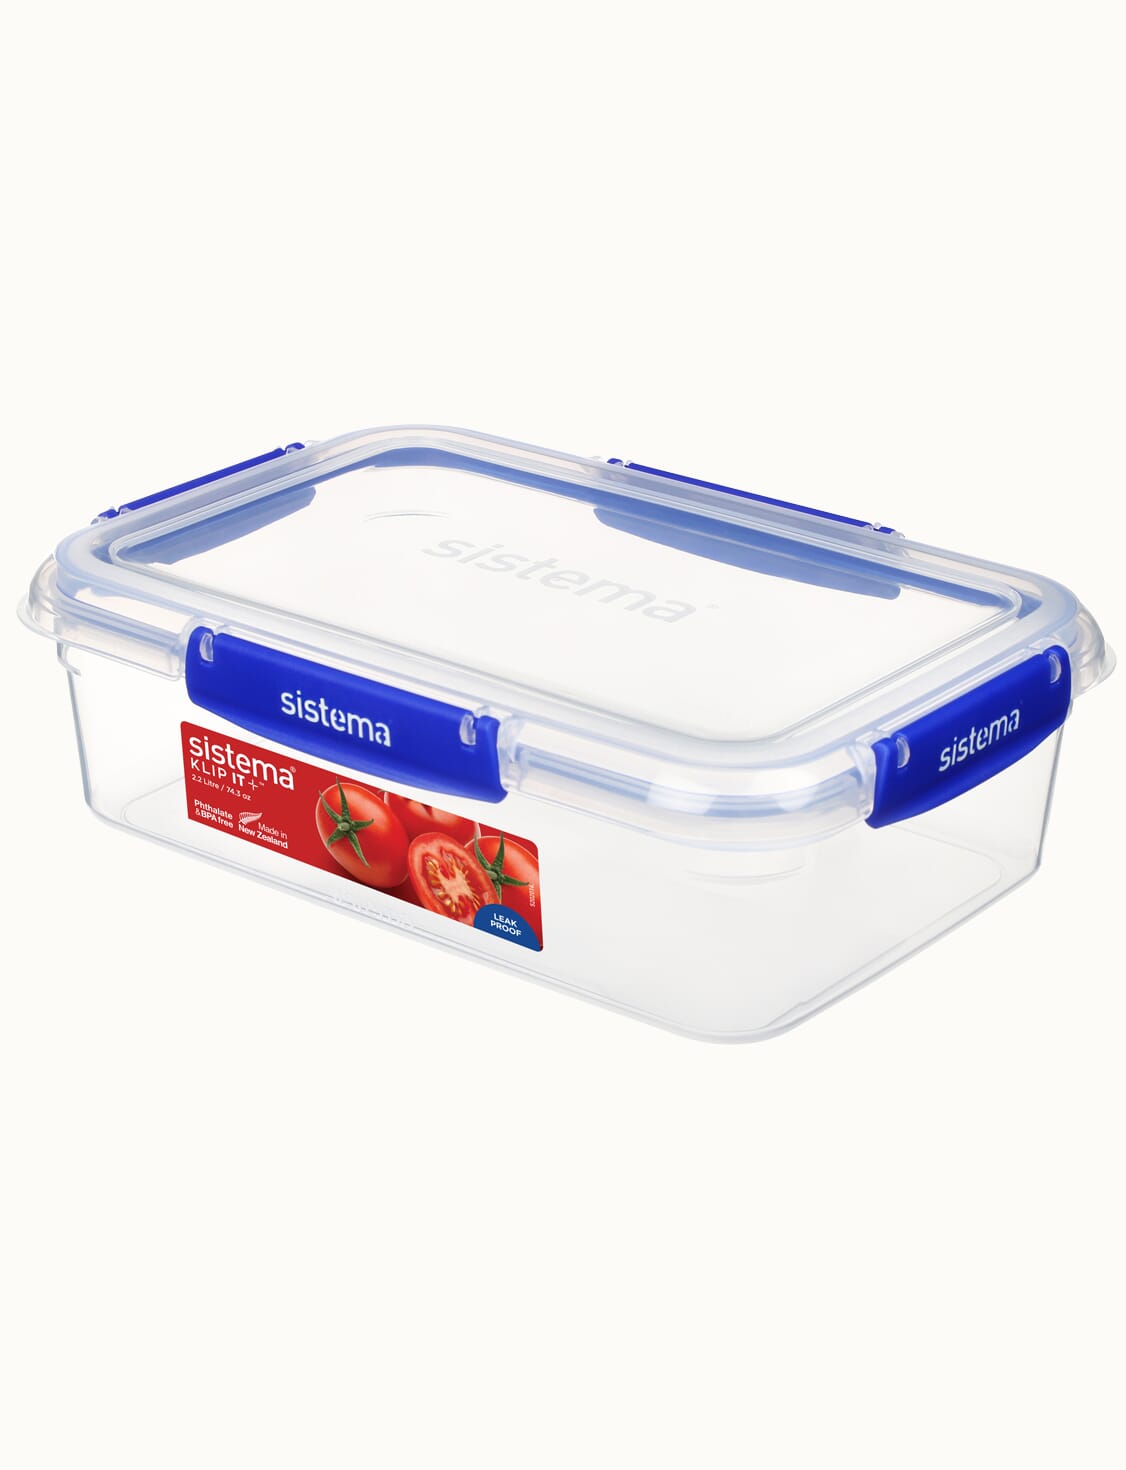 Imperial Home 8 Pc Plastic Storage Containers with Lids, Food Storage  Container Set, Kitchen Organization, Meal Prep, Blue Airtight Lock Lid